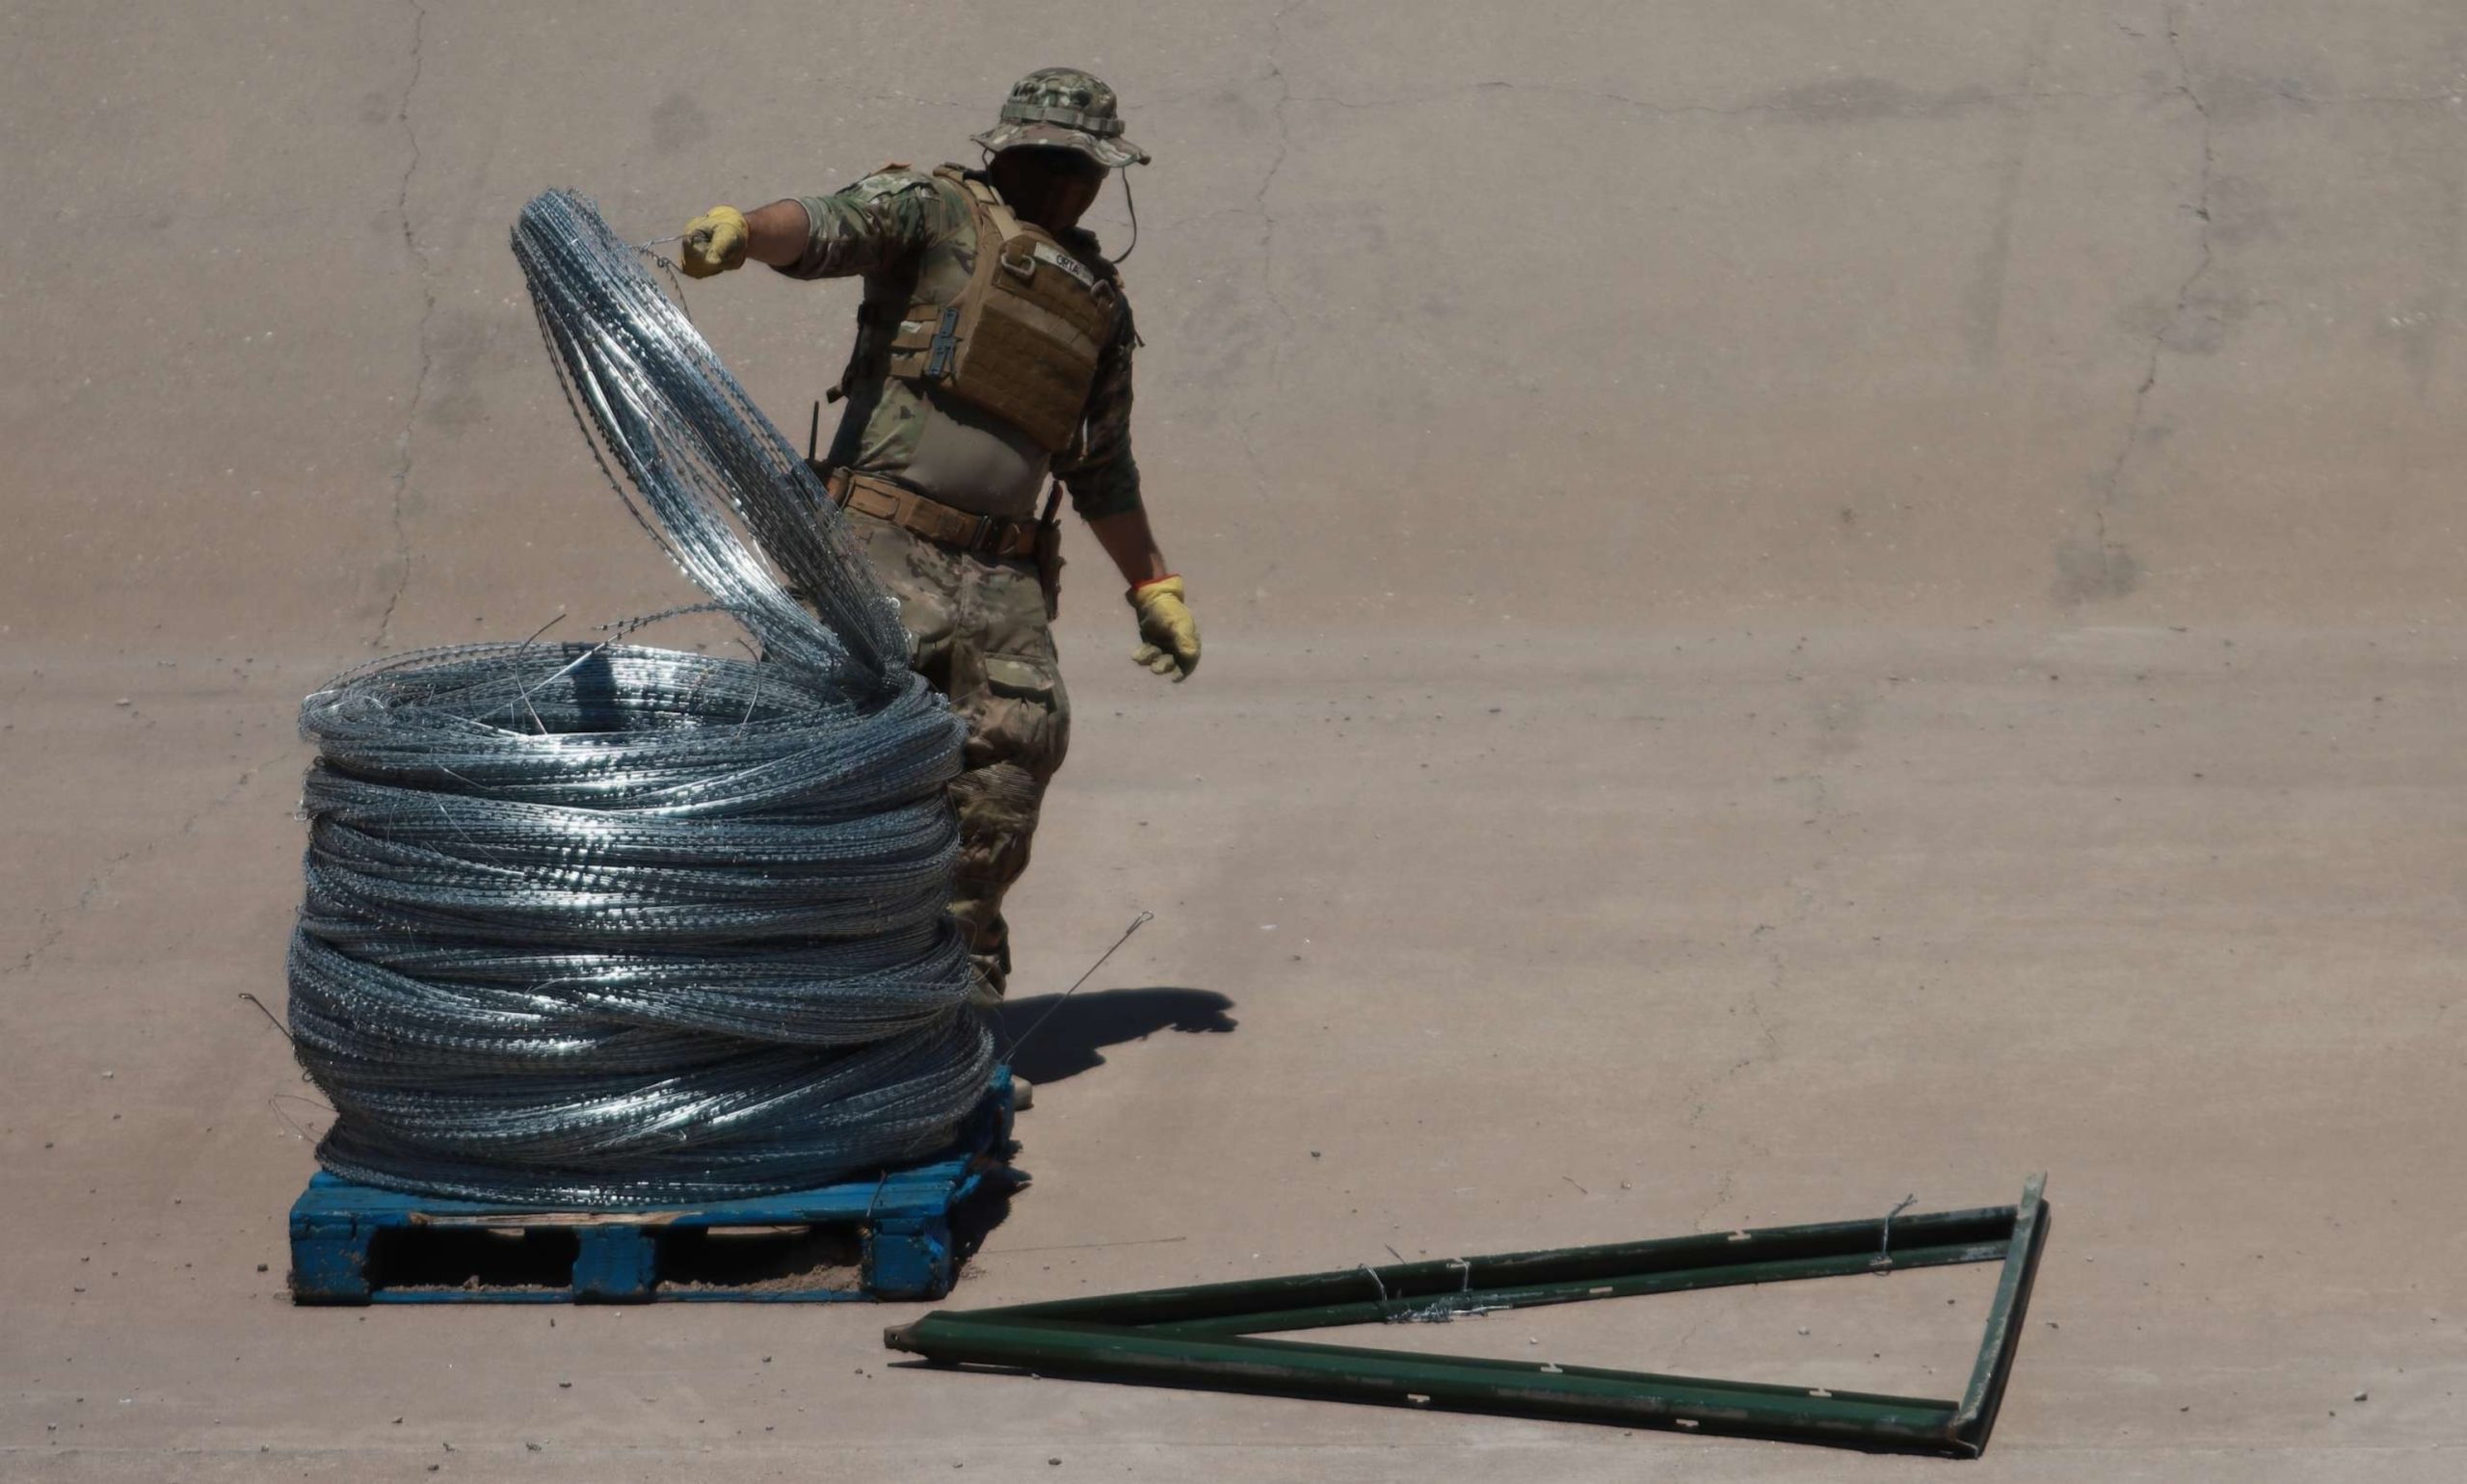 Installation of Concertina Wire Along the New Mexico Border in Texas